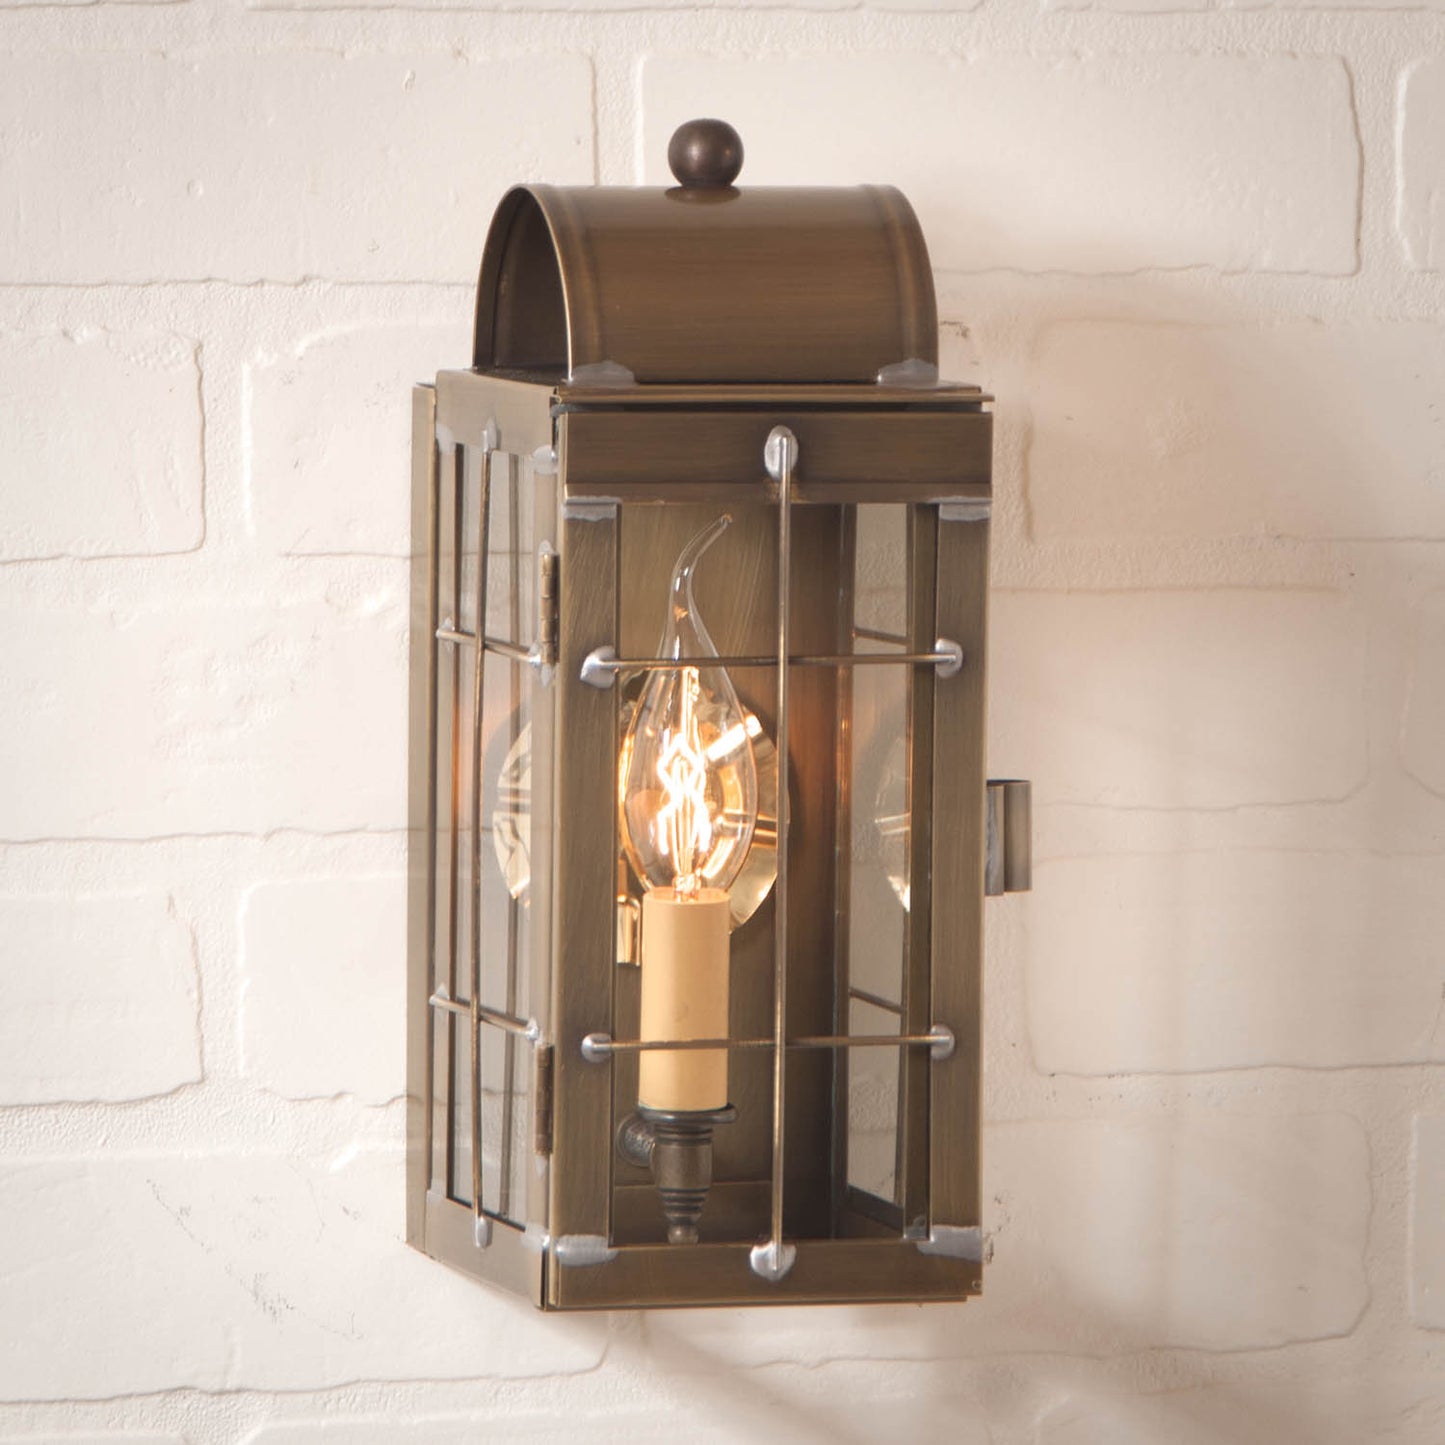 Hand-Crafted | Cape Cod | Wall Lantern